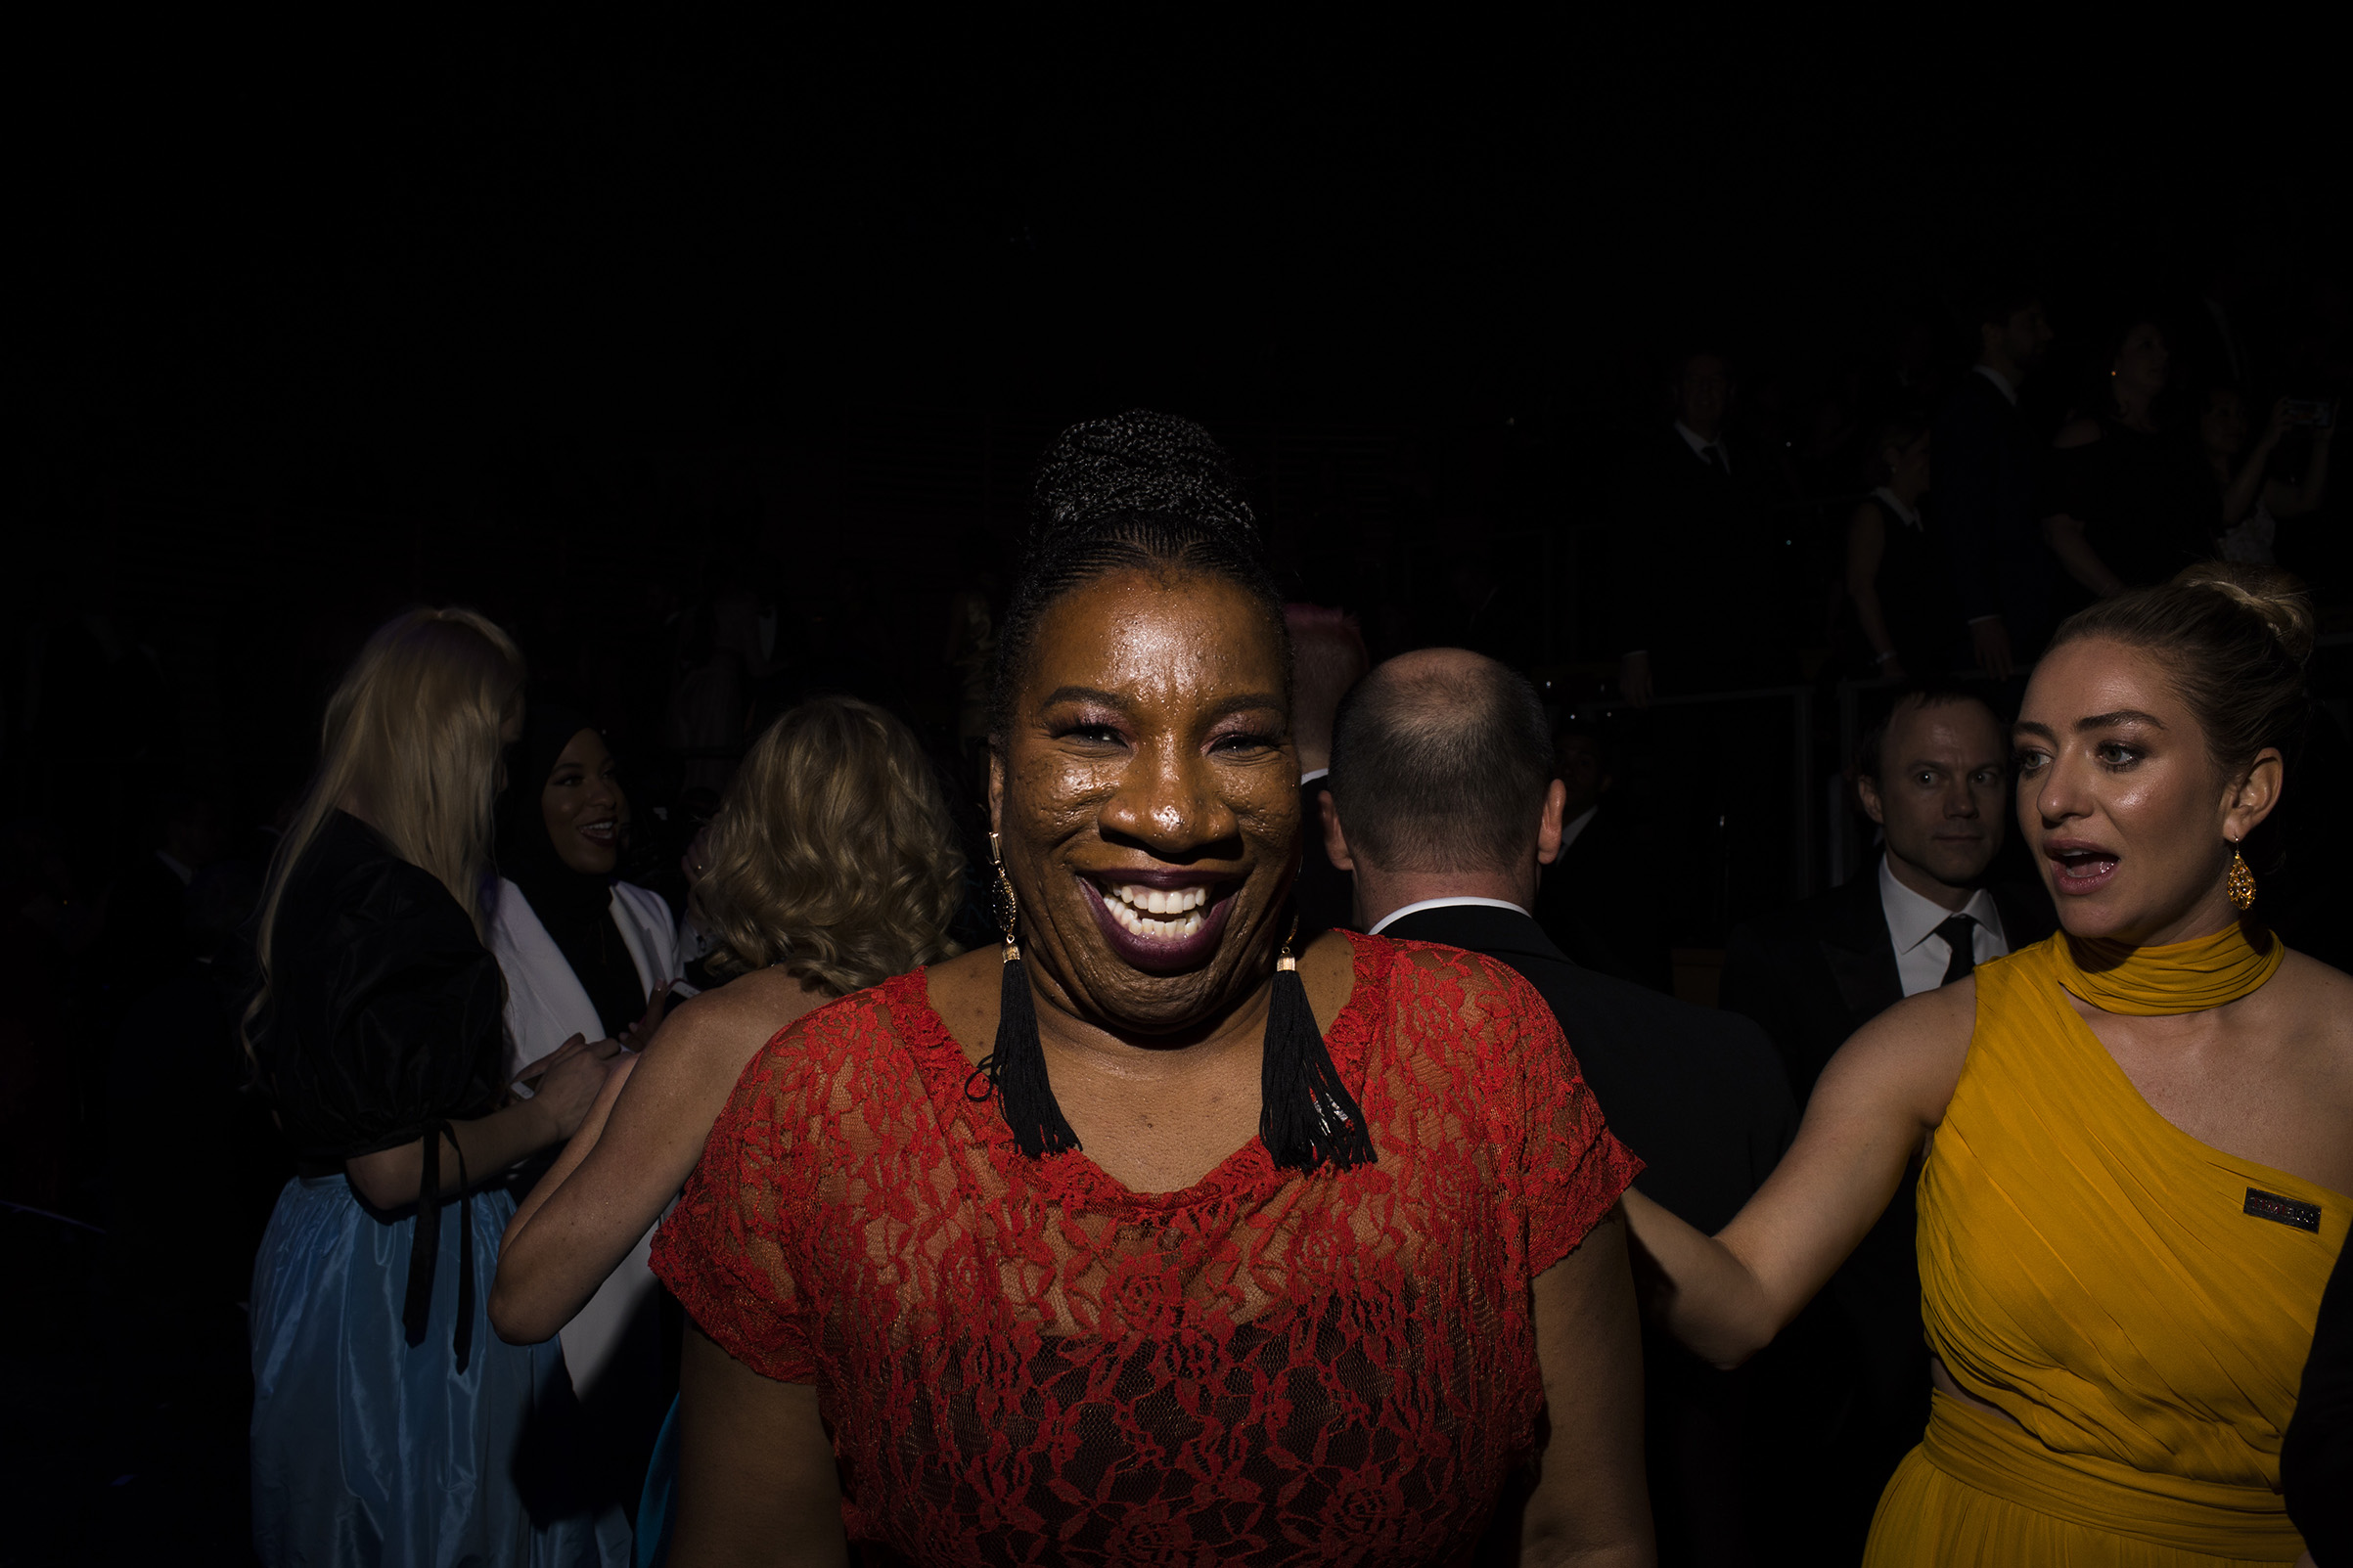 Activist and #MeToo founder Tarana Burke at the Time 100 Gala at Jazz at Lincoln Center on April 24, 2018 in New York City. (Landon Nordeman for TIME)